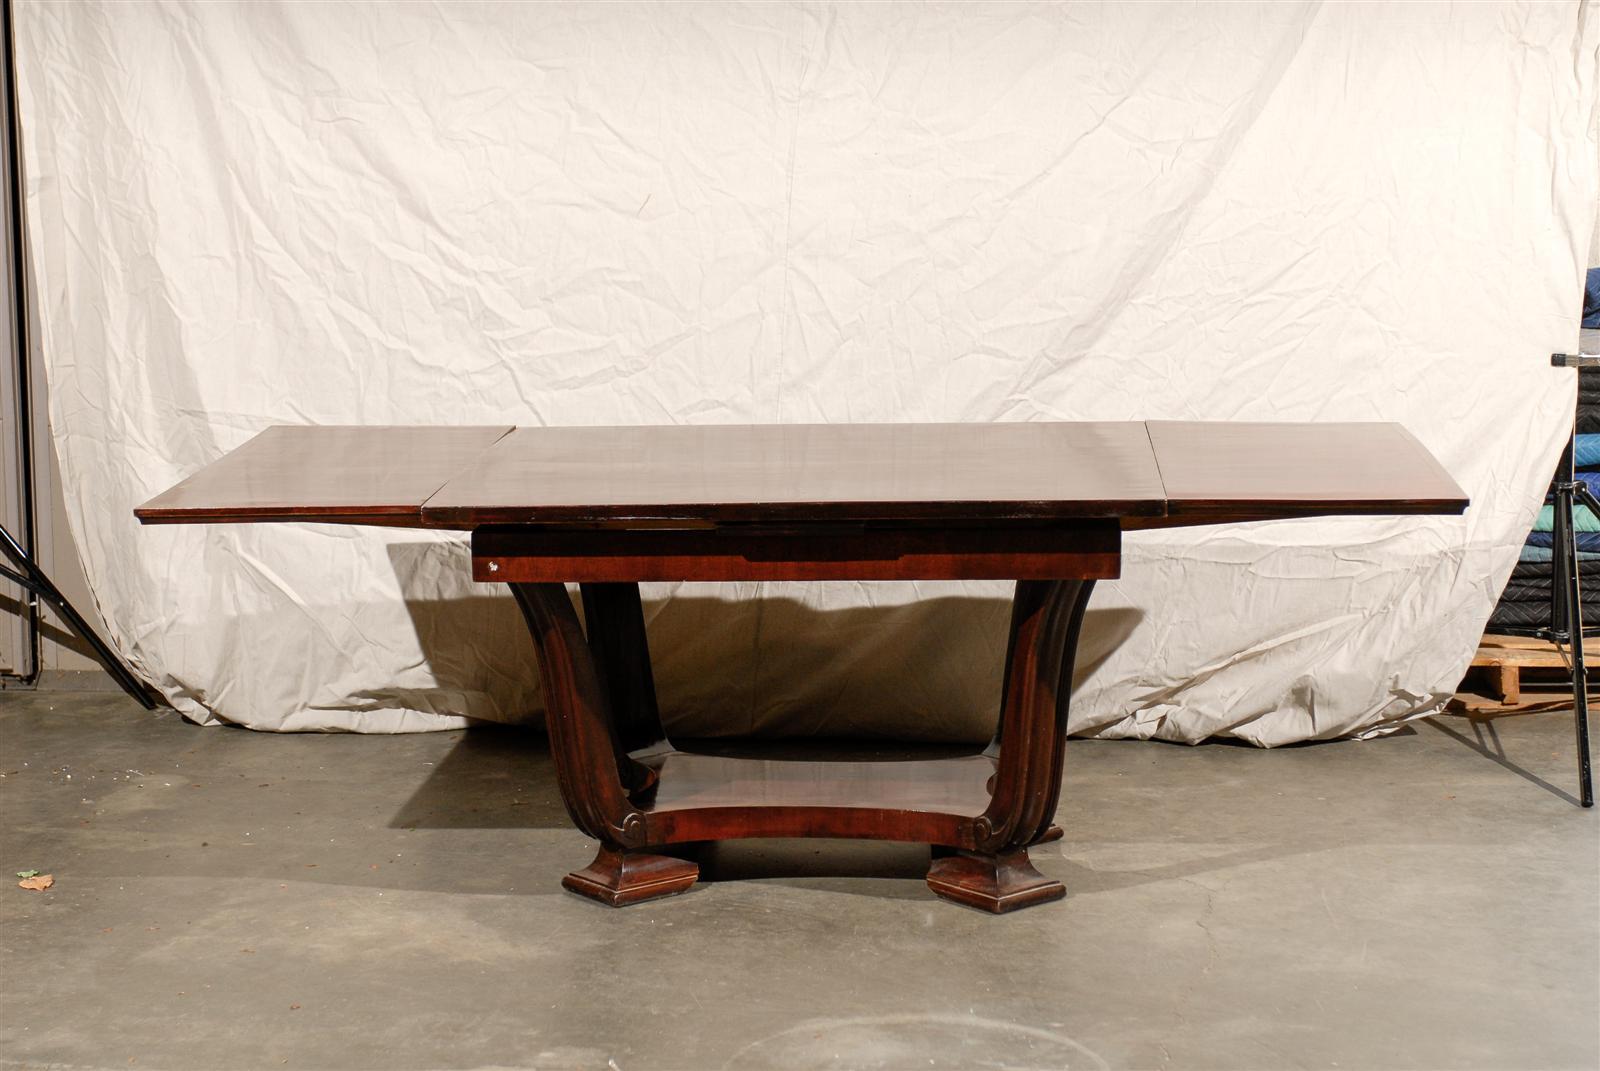 1930s French Art Deco dining table. Measurements when open 88.5